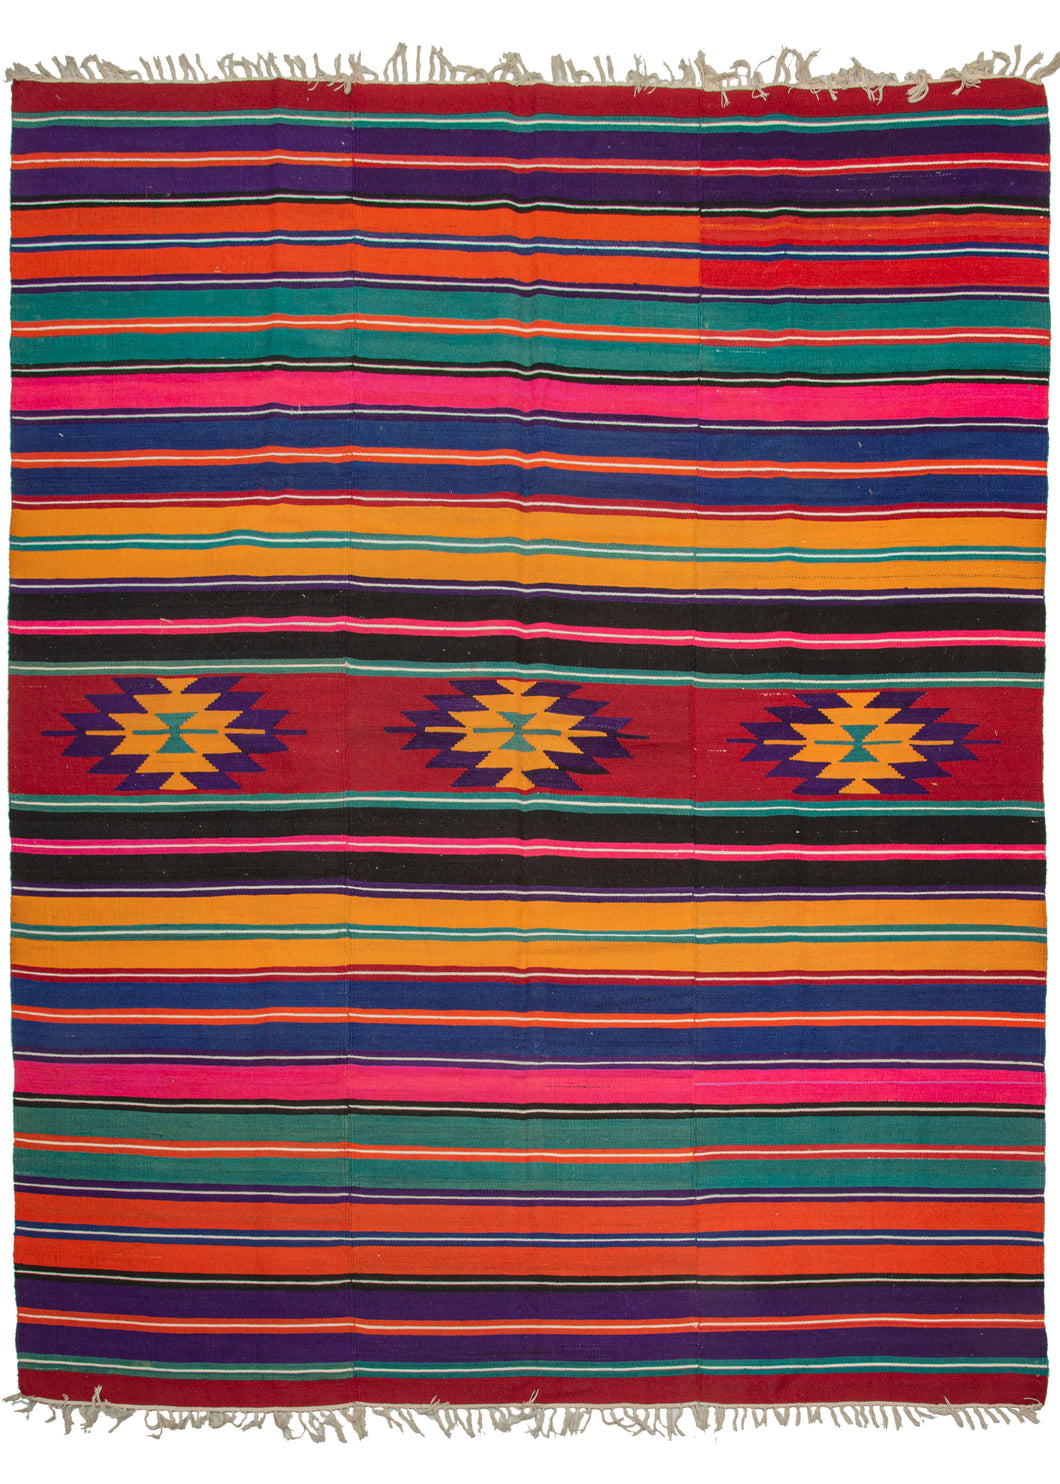 Turkish beach kilim featuring a very bright and cheerful color palette, with a horizontal stripe design and central geometric motifs. In excellent condition, signs of wear consistent with age.